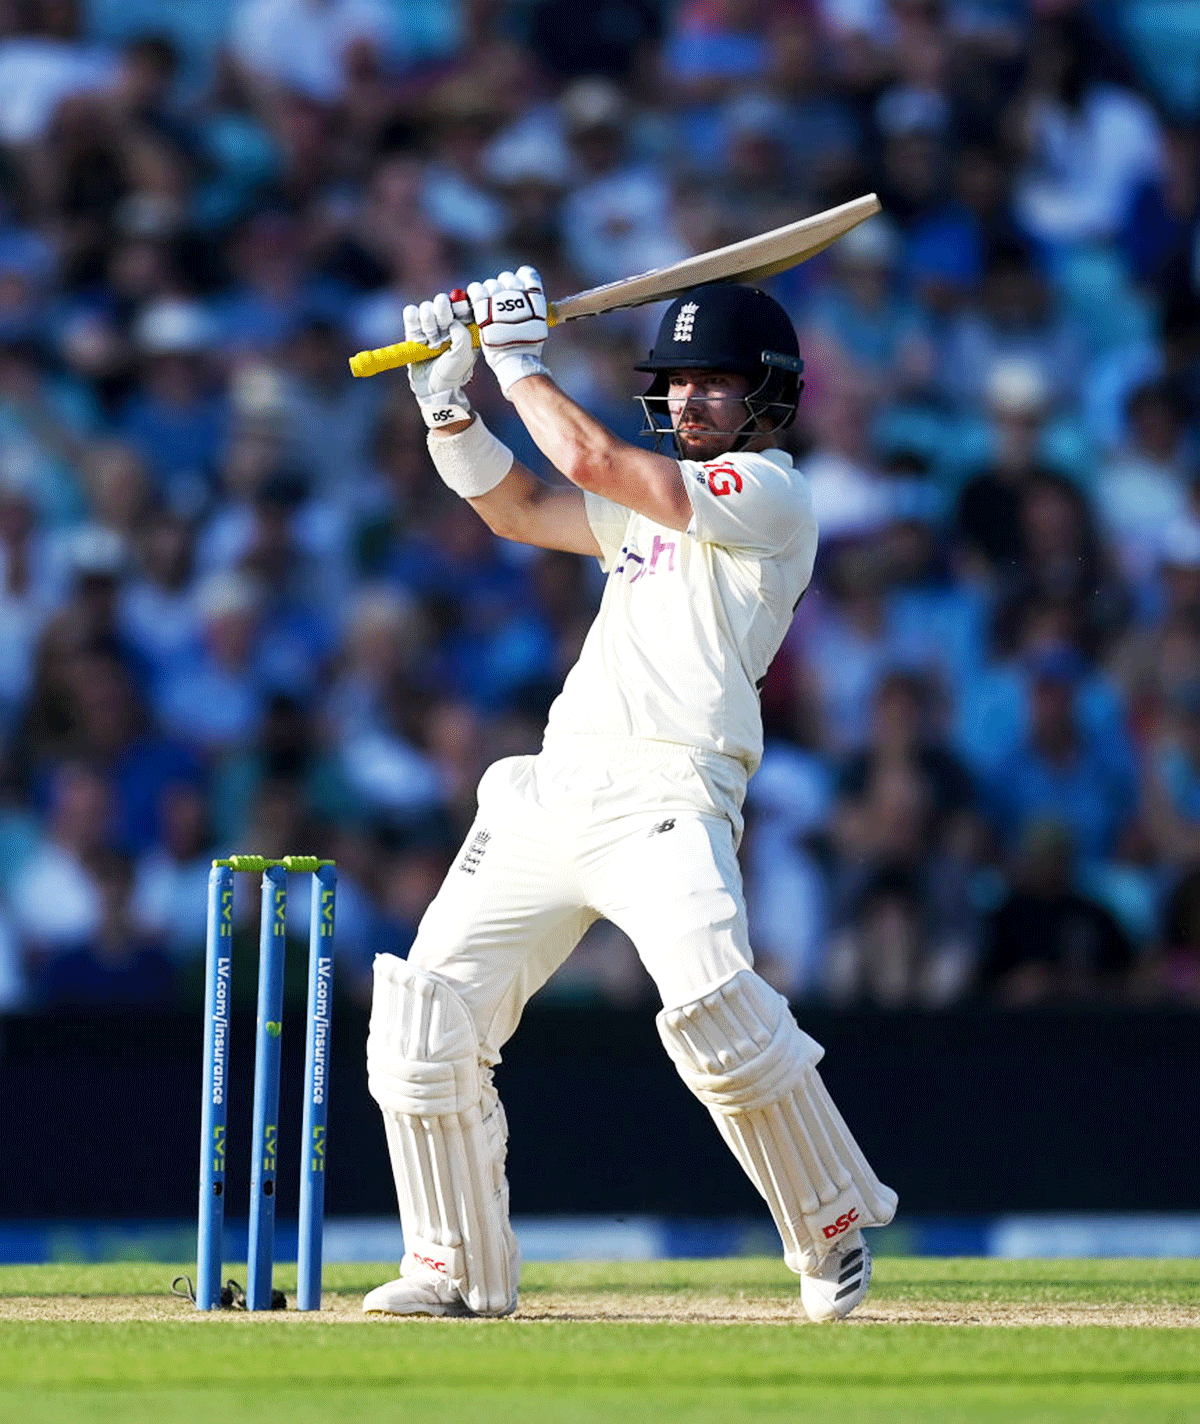 Opener Rory Burns bats during England's second innings.